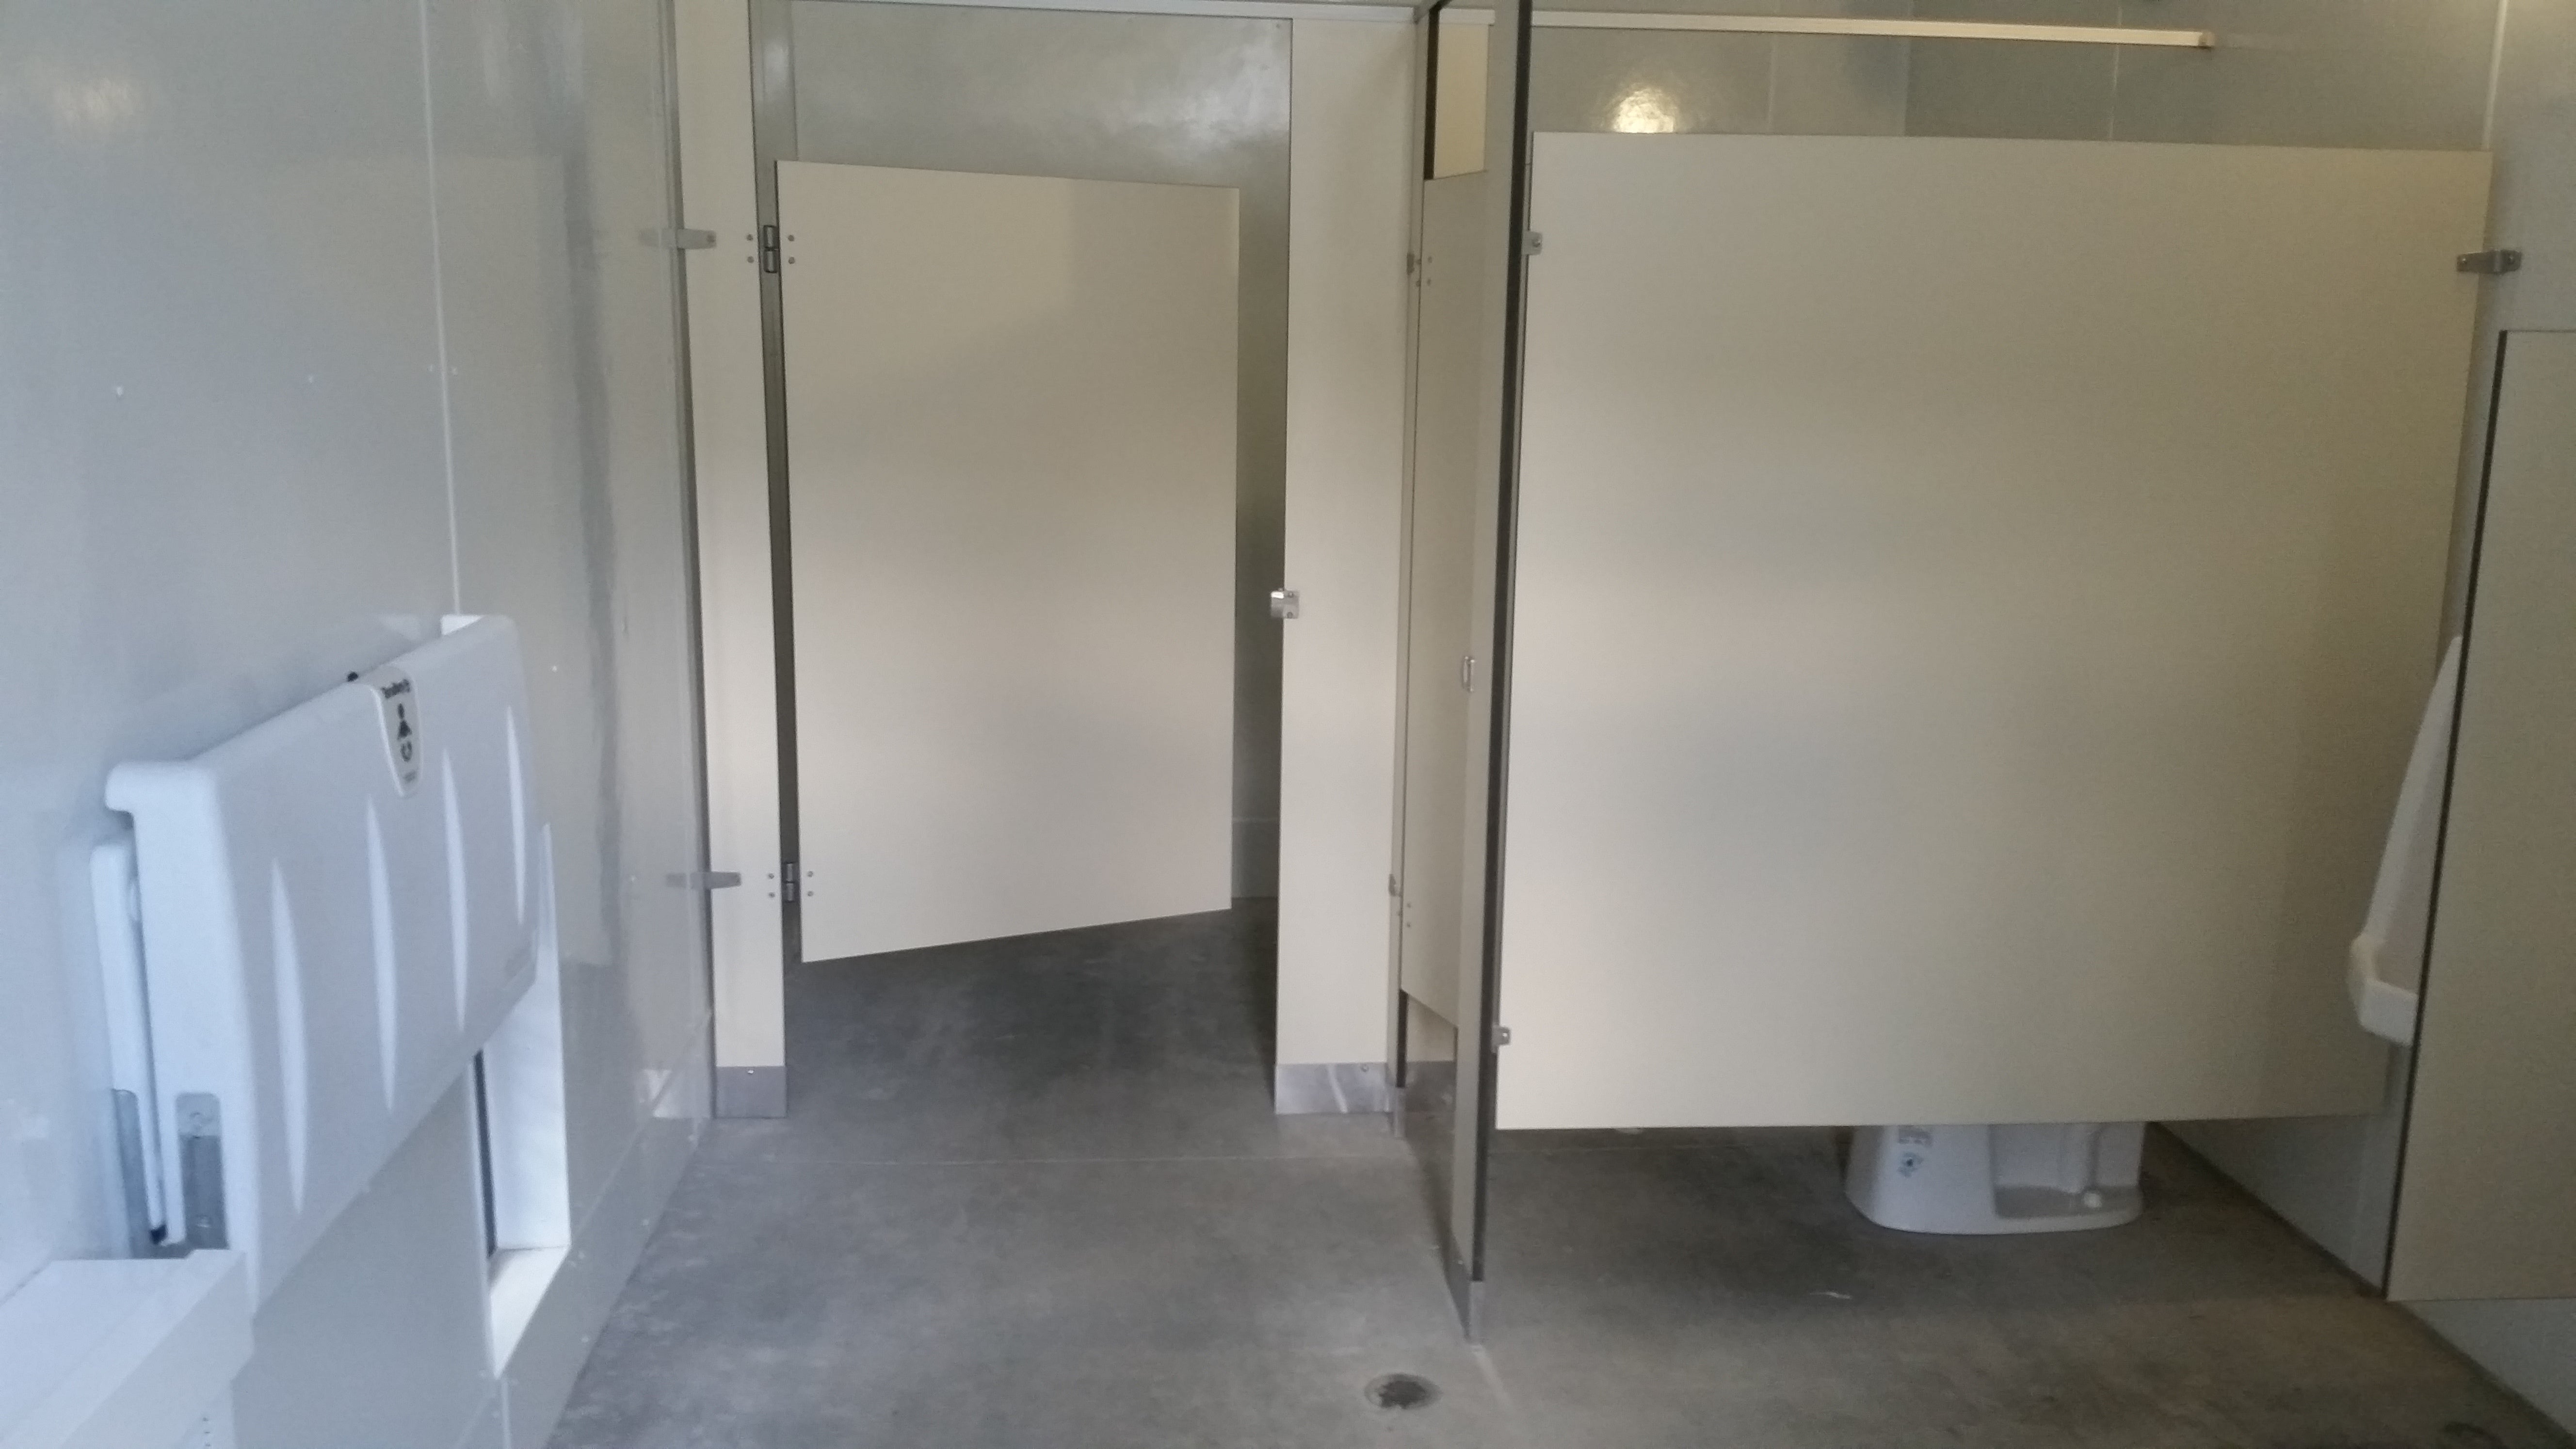 Clean stalls and baby changing station